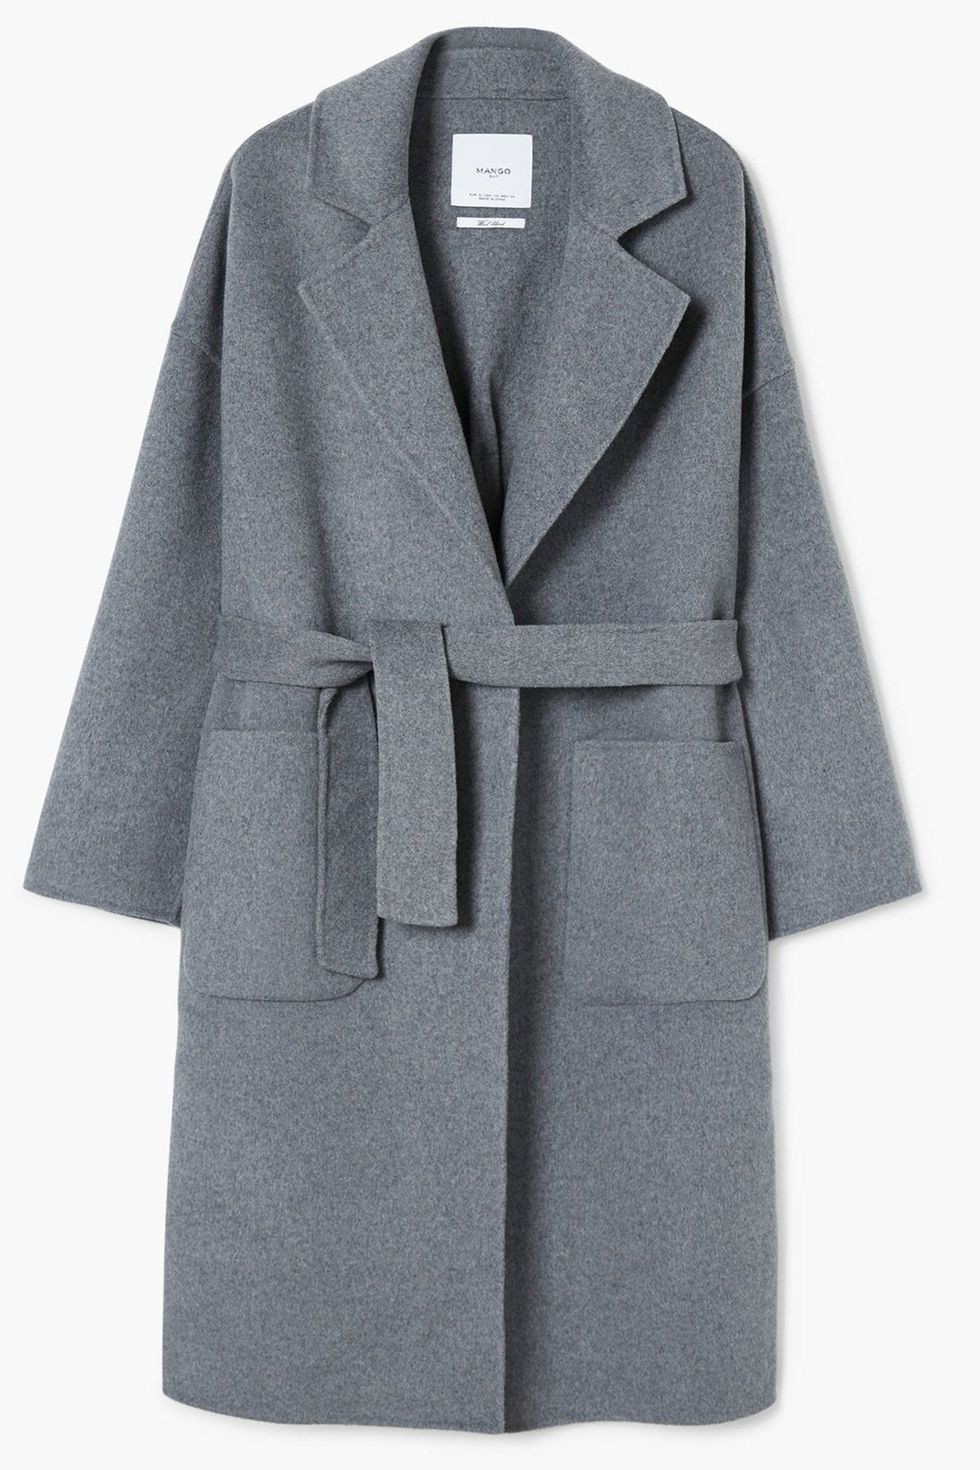 Clothing, Coat, Outerwear, Overcoat, Sleeve, Collar, Trench coat, Duster, Robe, 